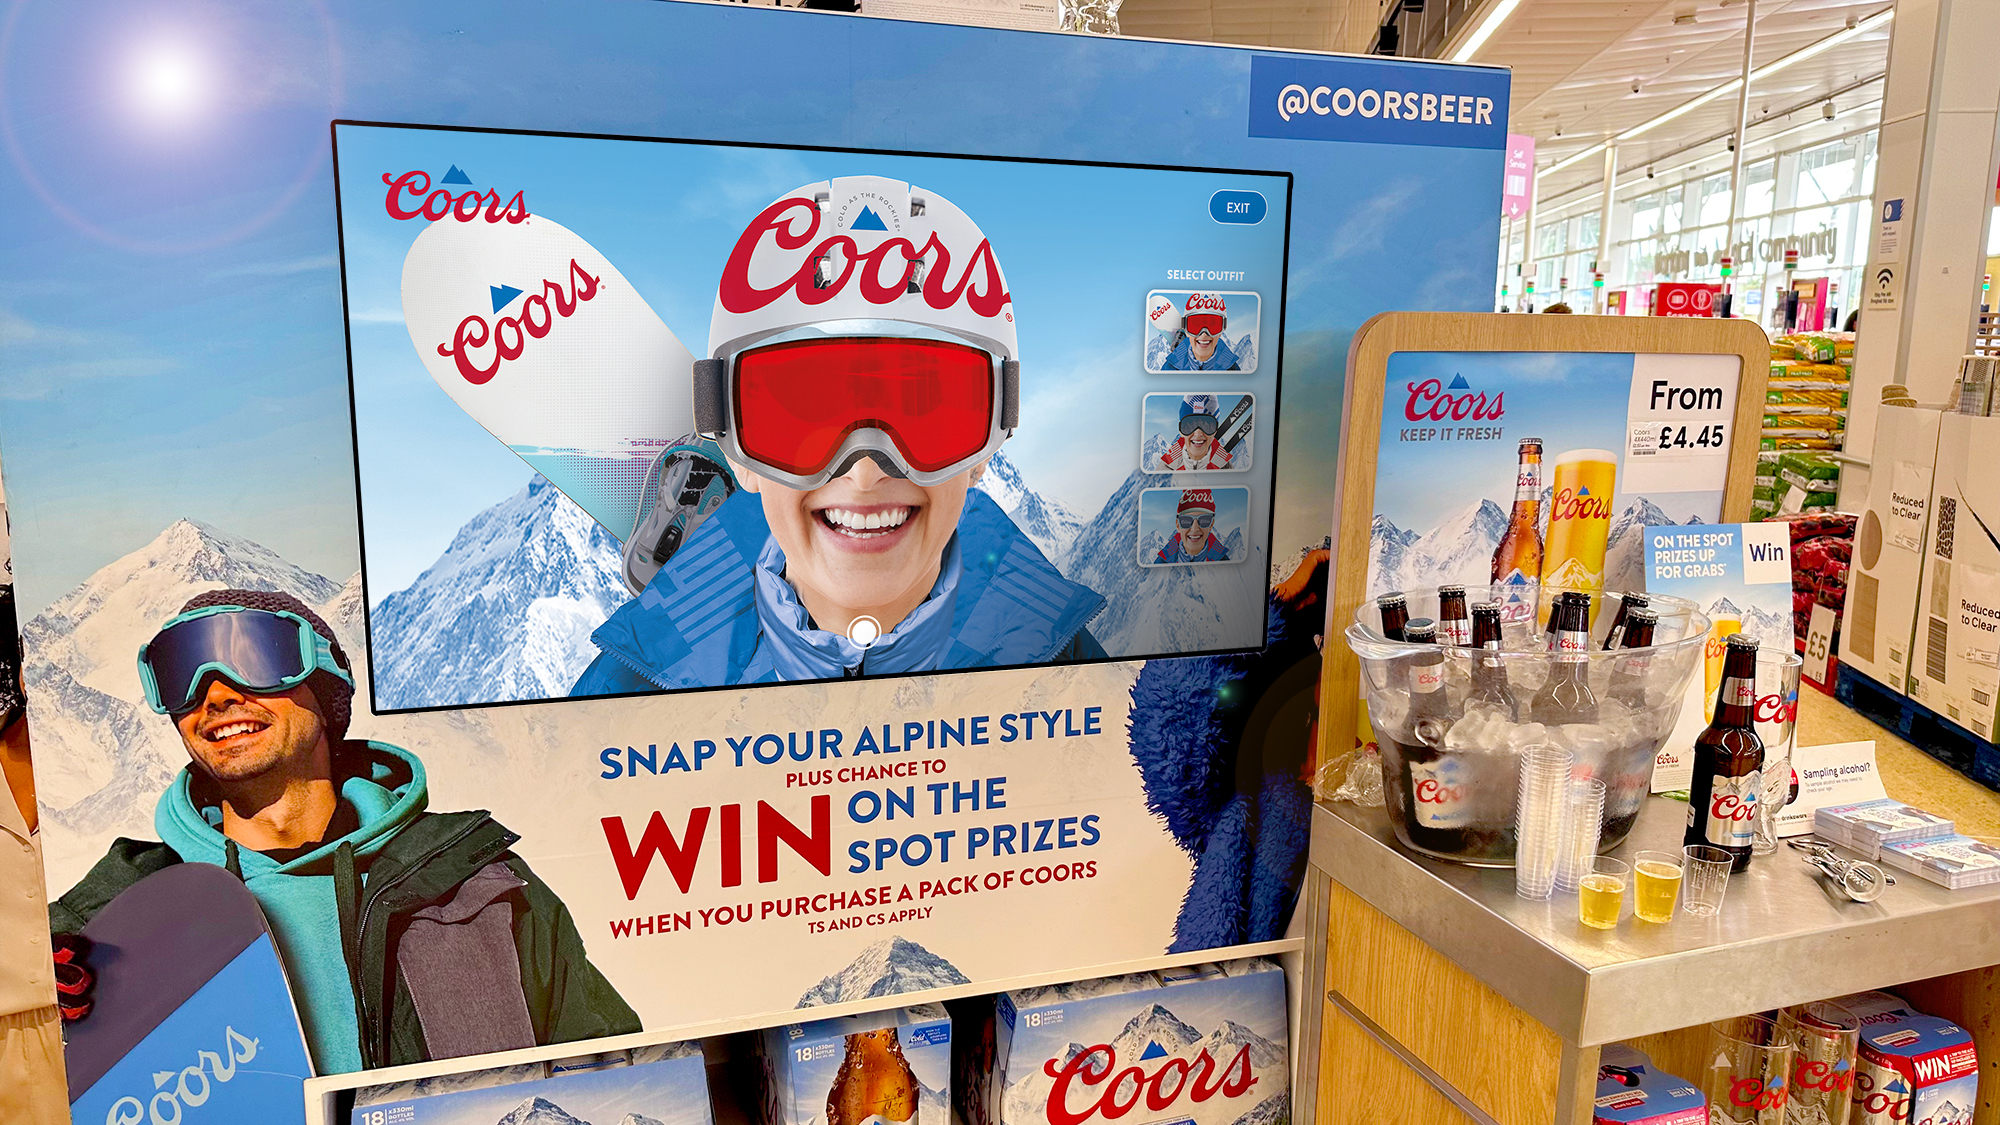 Gooii develops Coors’ latest AR retail experience that transports shoppers to the slopes image